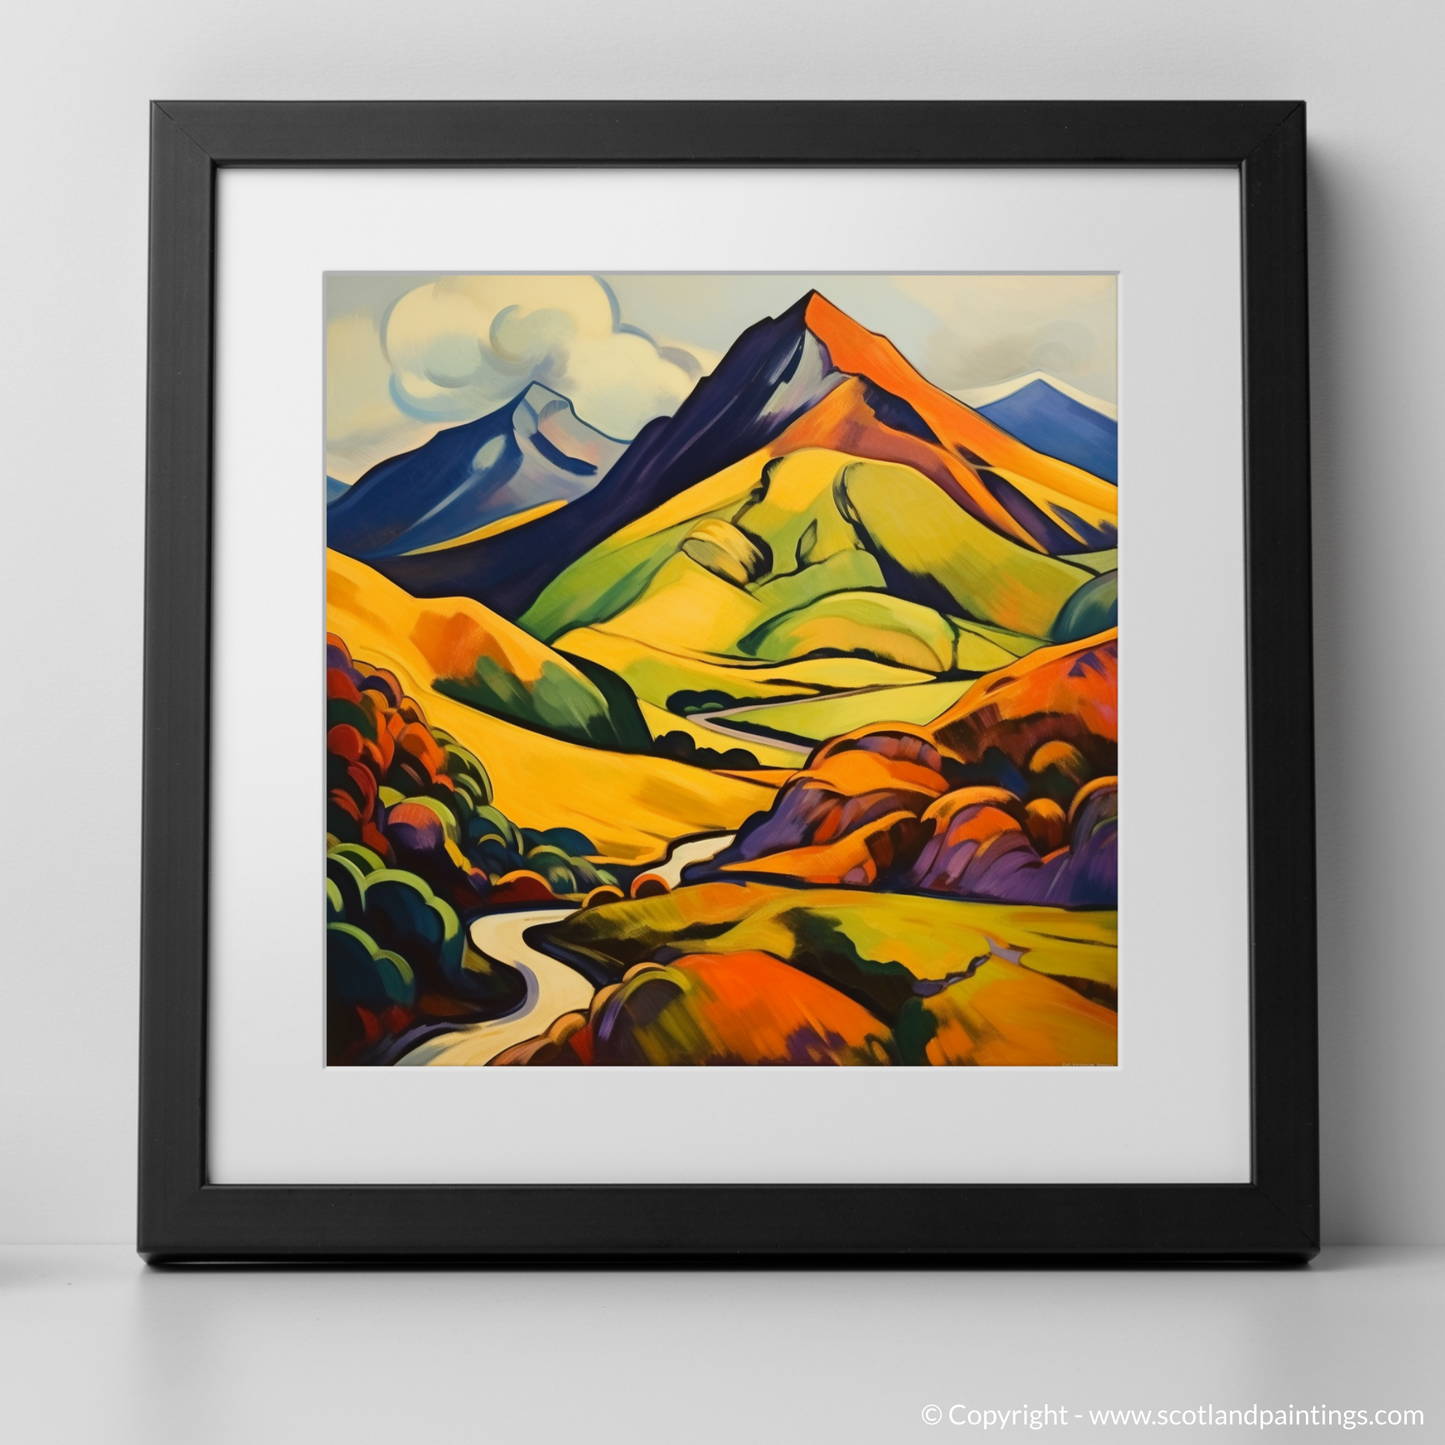 Vibrant Highland Dream: A Fauvist Ode to Meall a' Choire Lèith